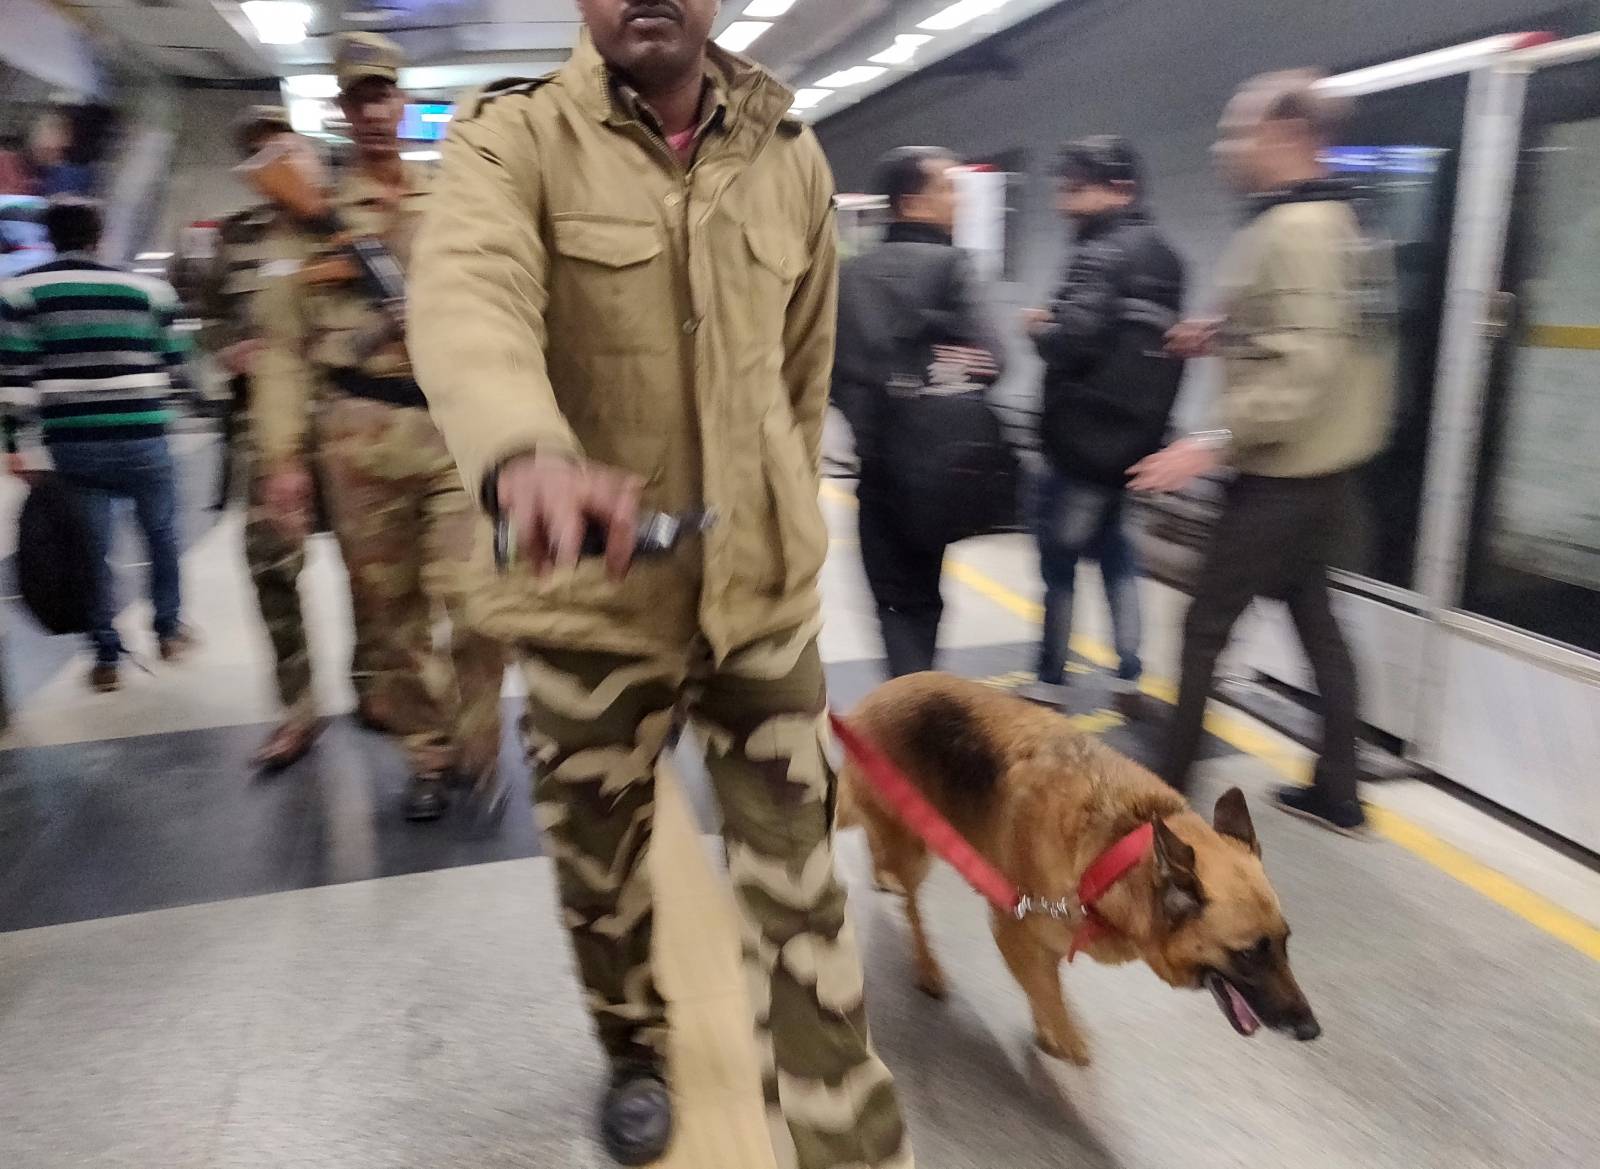 Members of Central Industrial Security Force with a sniffer dog patrol inside a metro station in New Delhi,